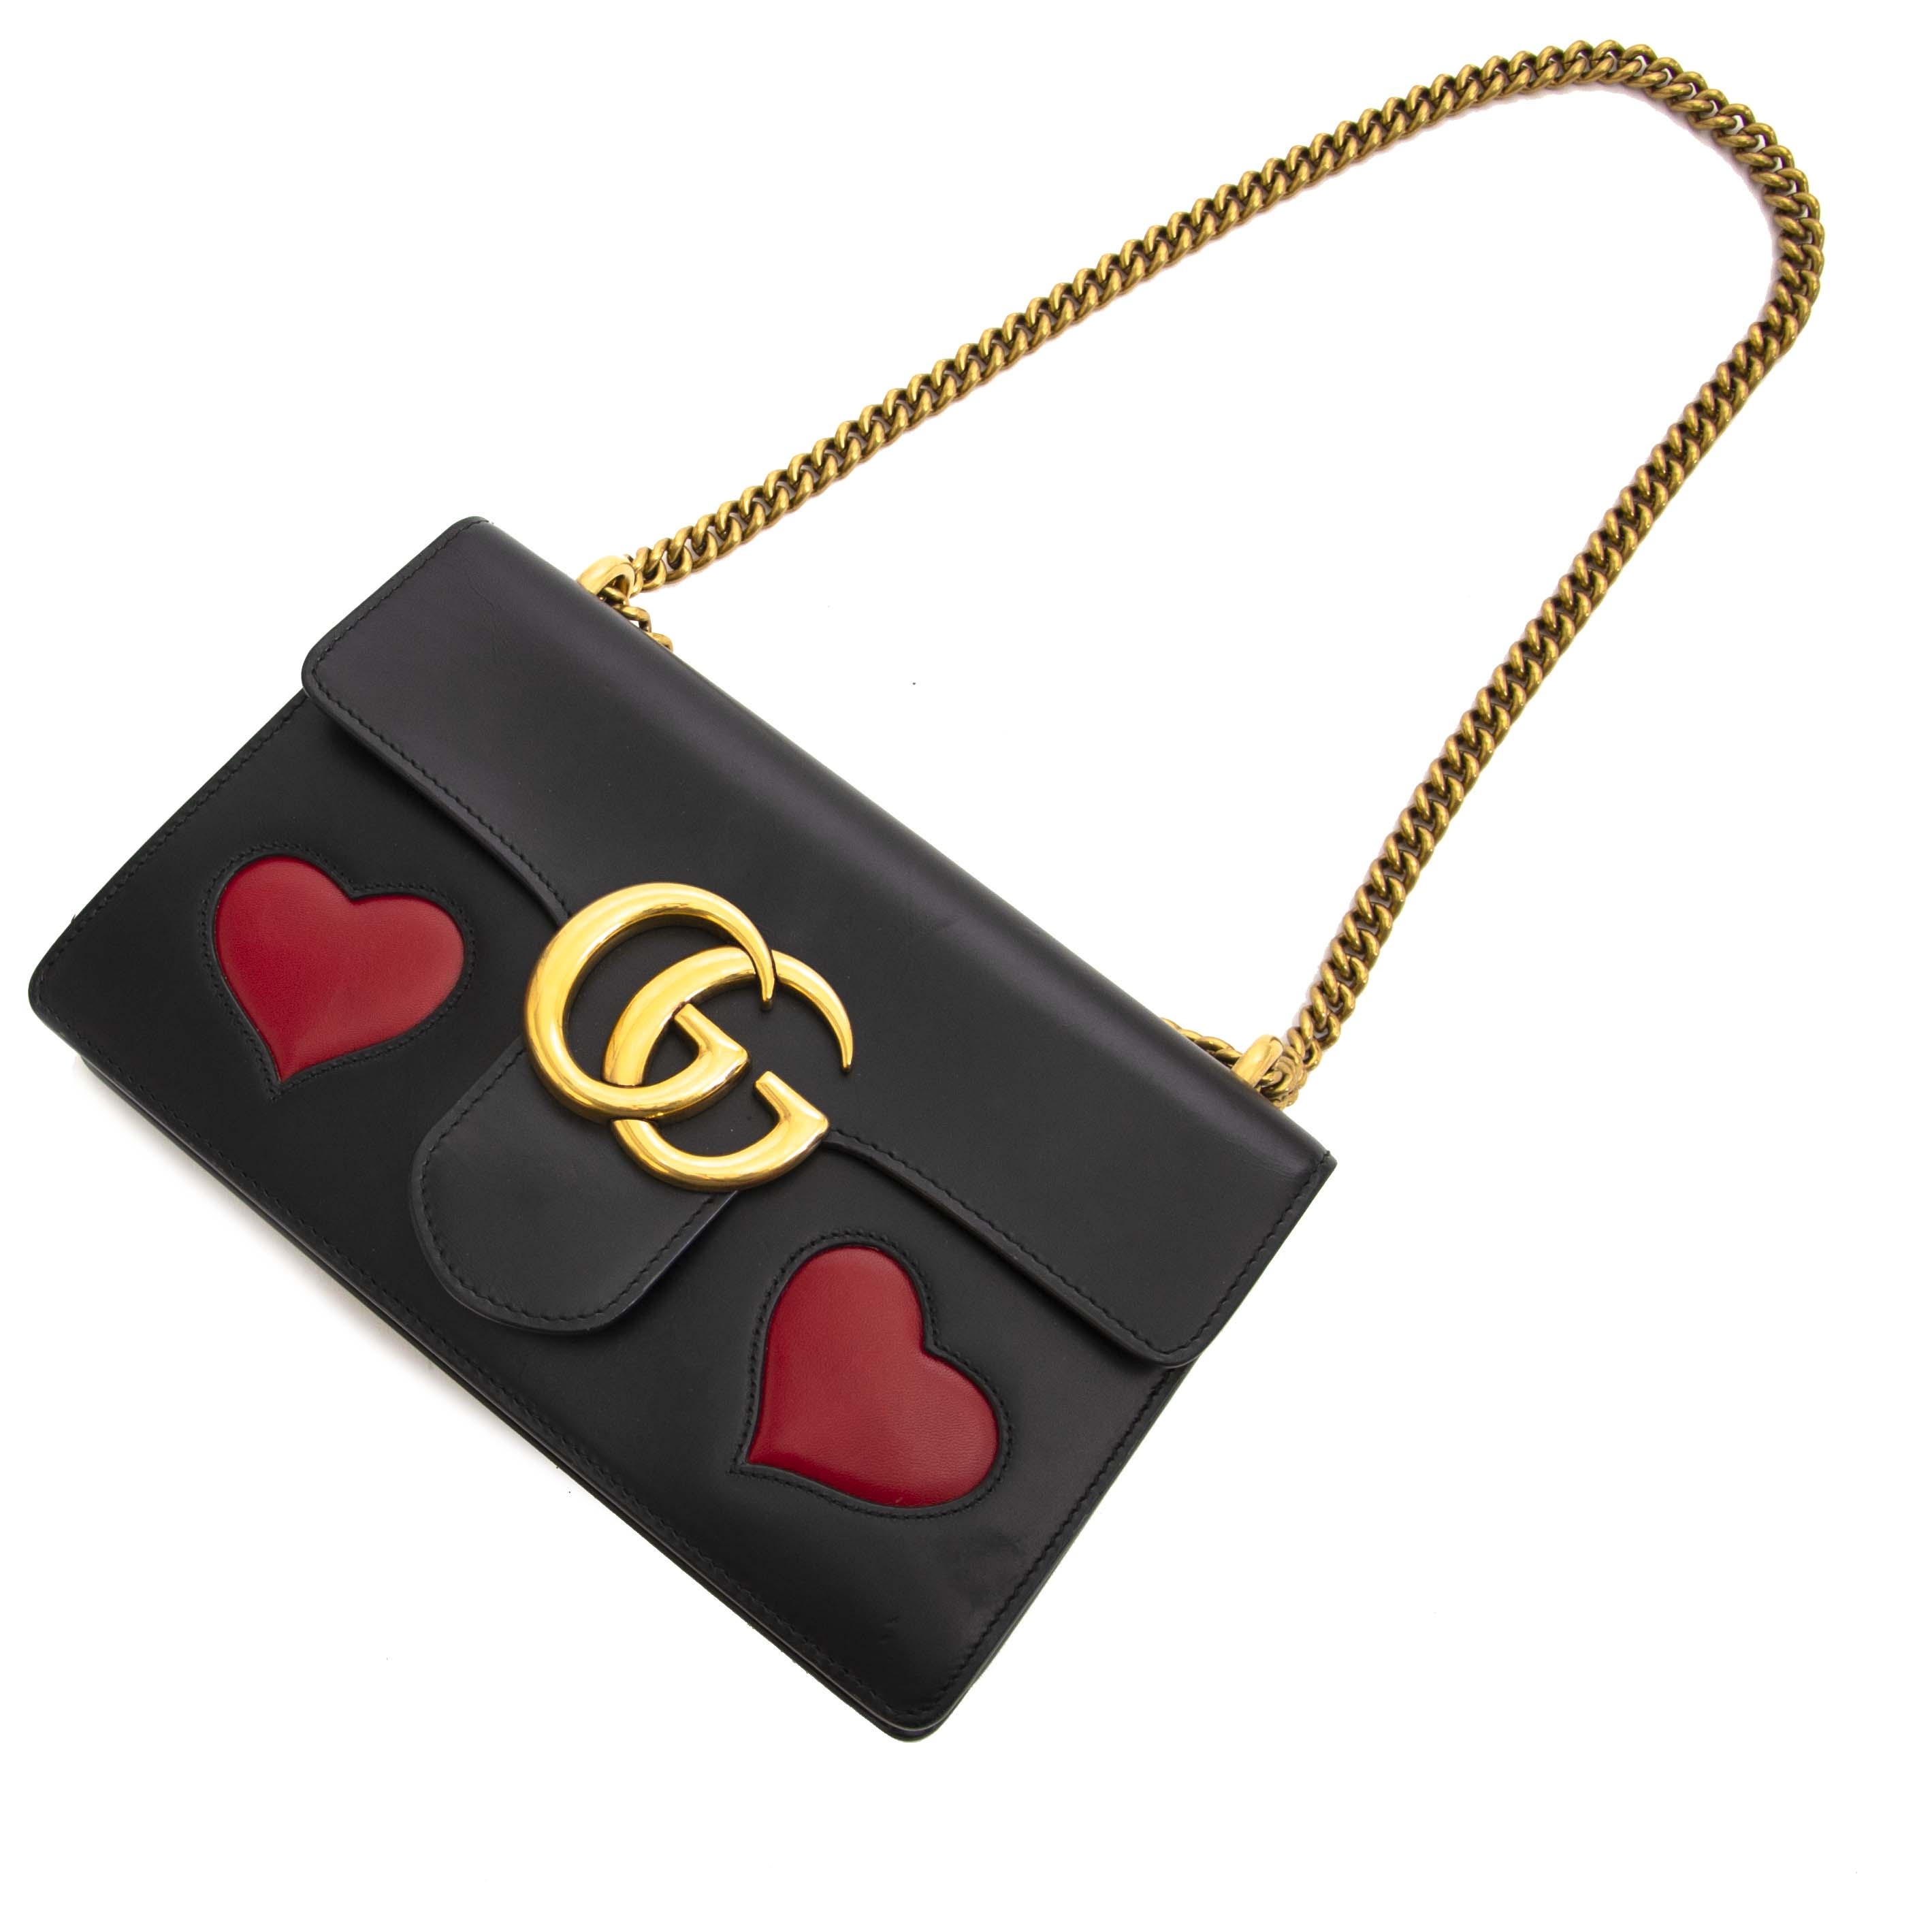 Shop GUCCI GG Marmont 2022 SS GG Marmont heart-shaped coin purse  (699517DTDHT5909, 699517DTDHT9022, 699517 DTDHT 1000) by Sunflower.et |  BUYMA